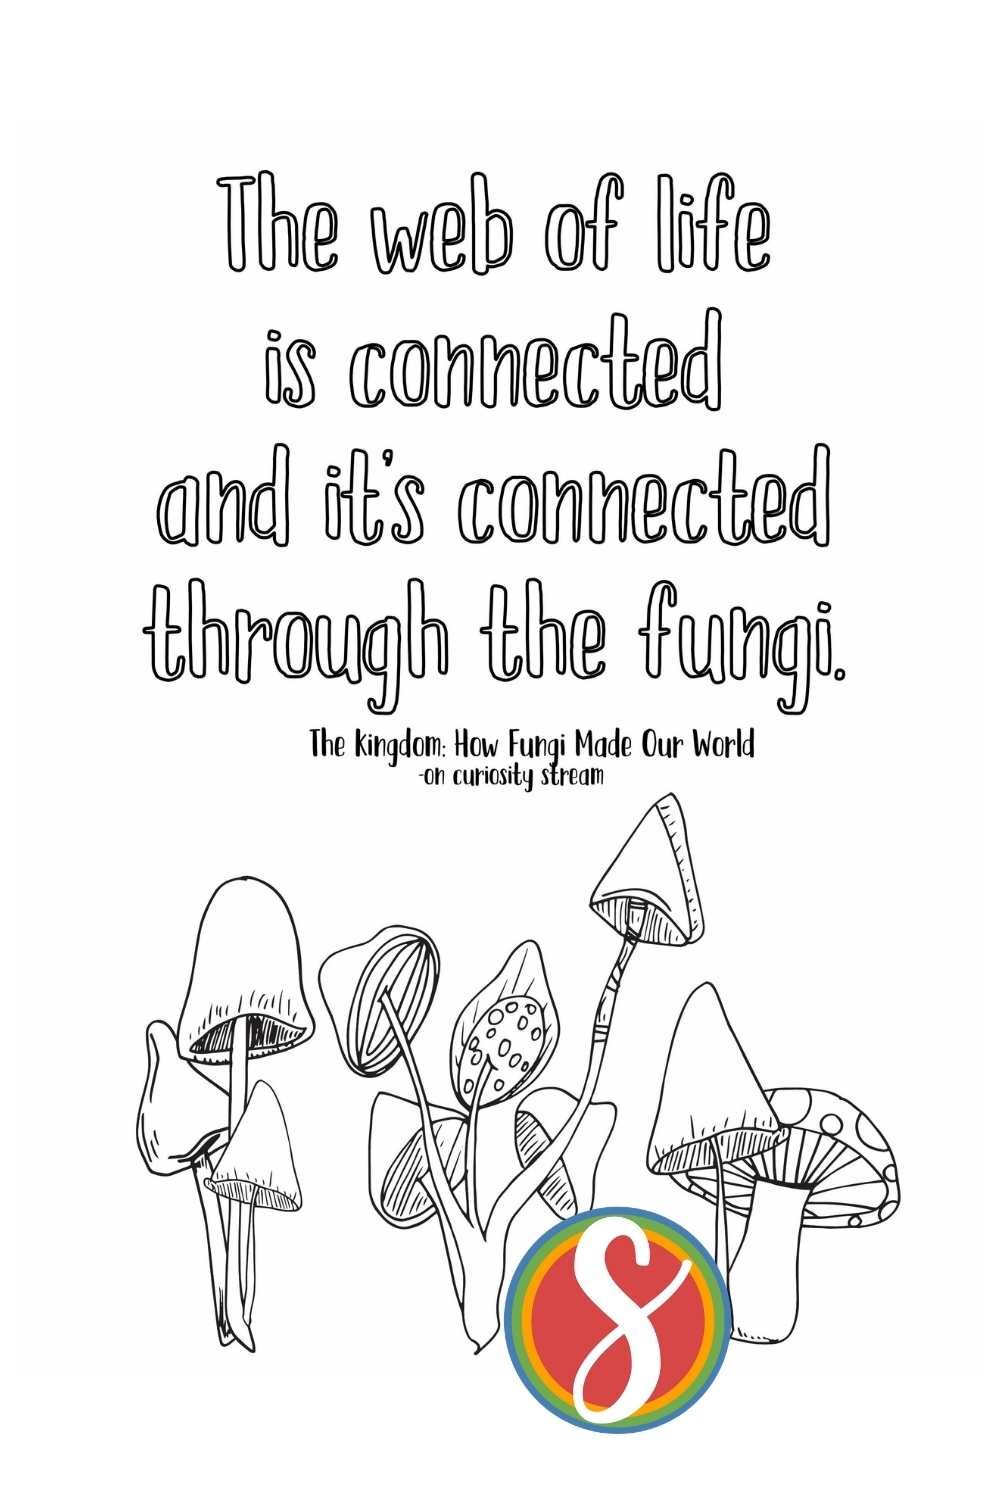 “The web of life is connected and it’s connected through the fungi.” - from the show The Kingdom: How Fungi Made Our World